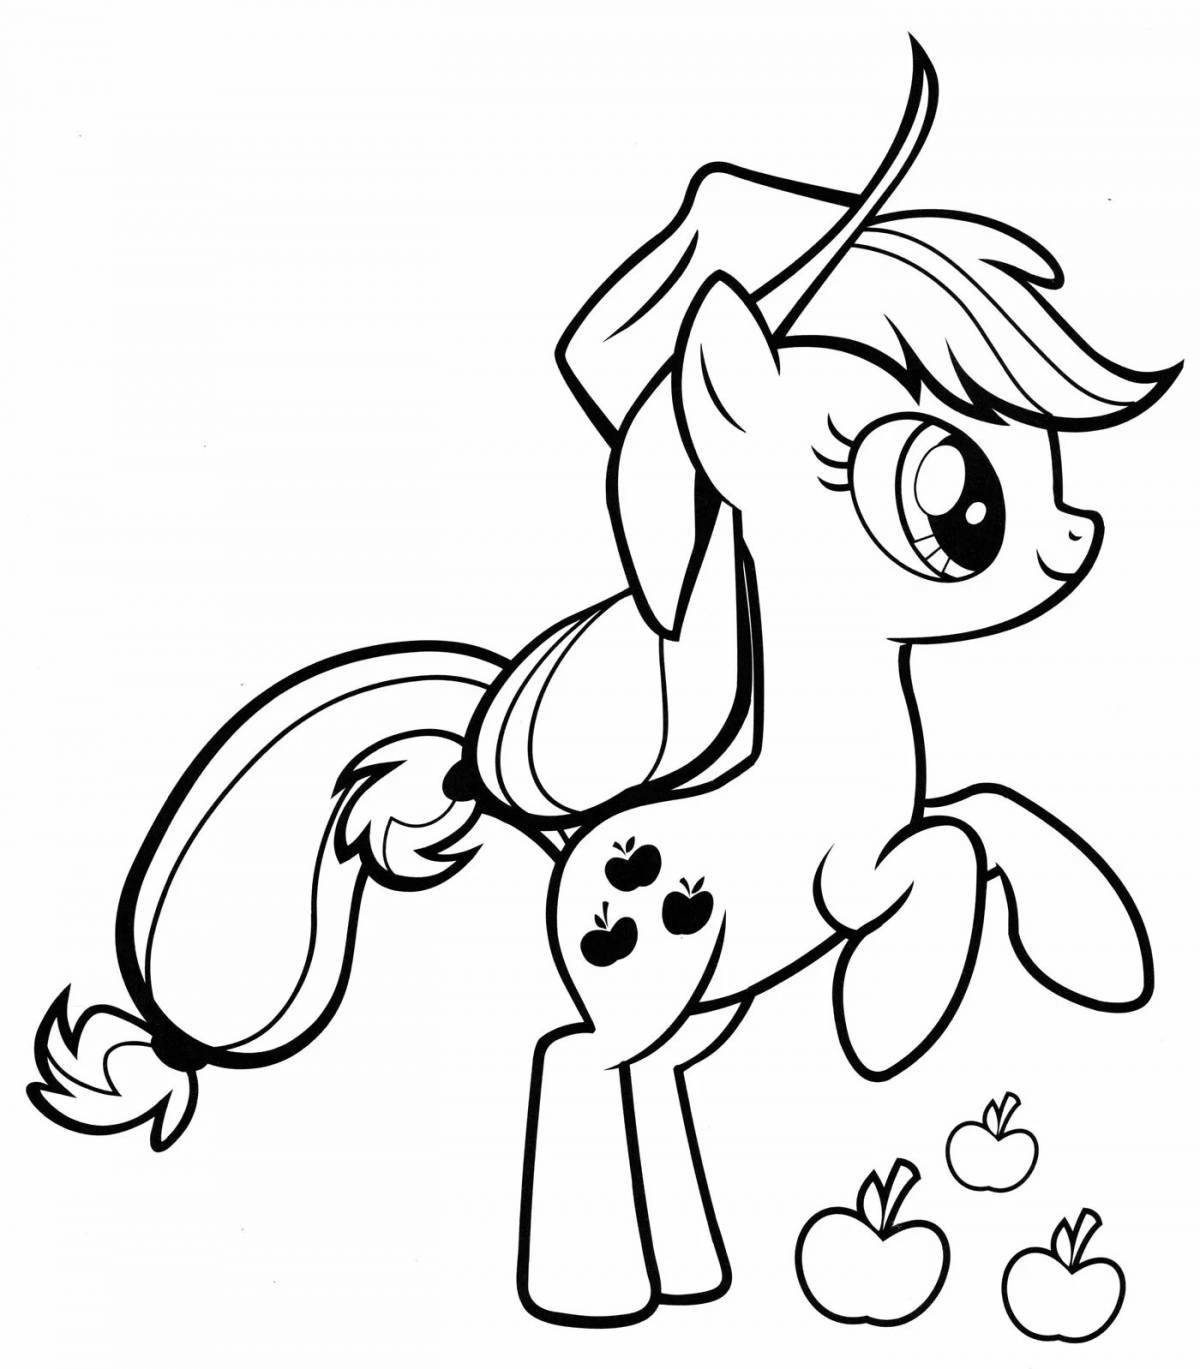 Colorful Applejack pony coloring page